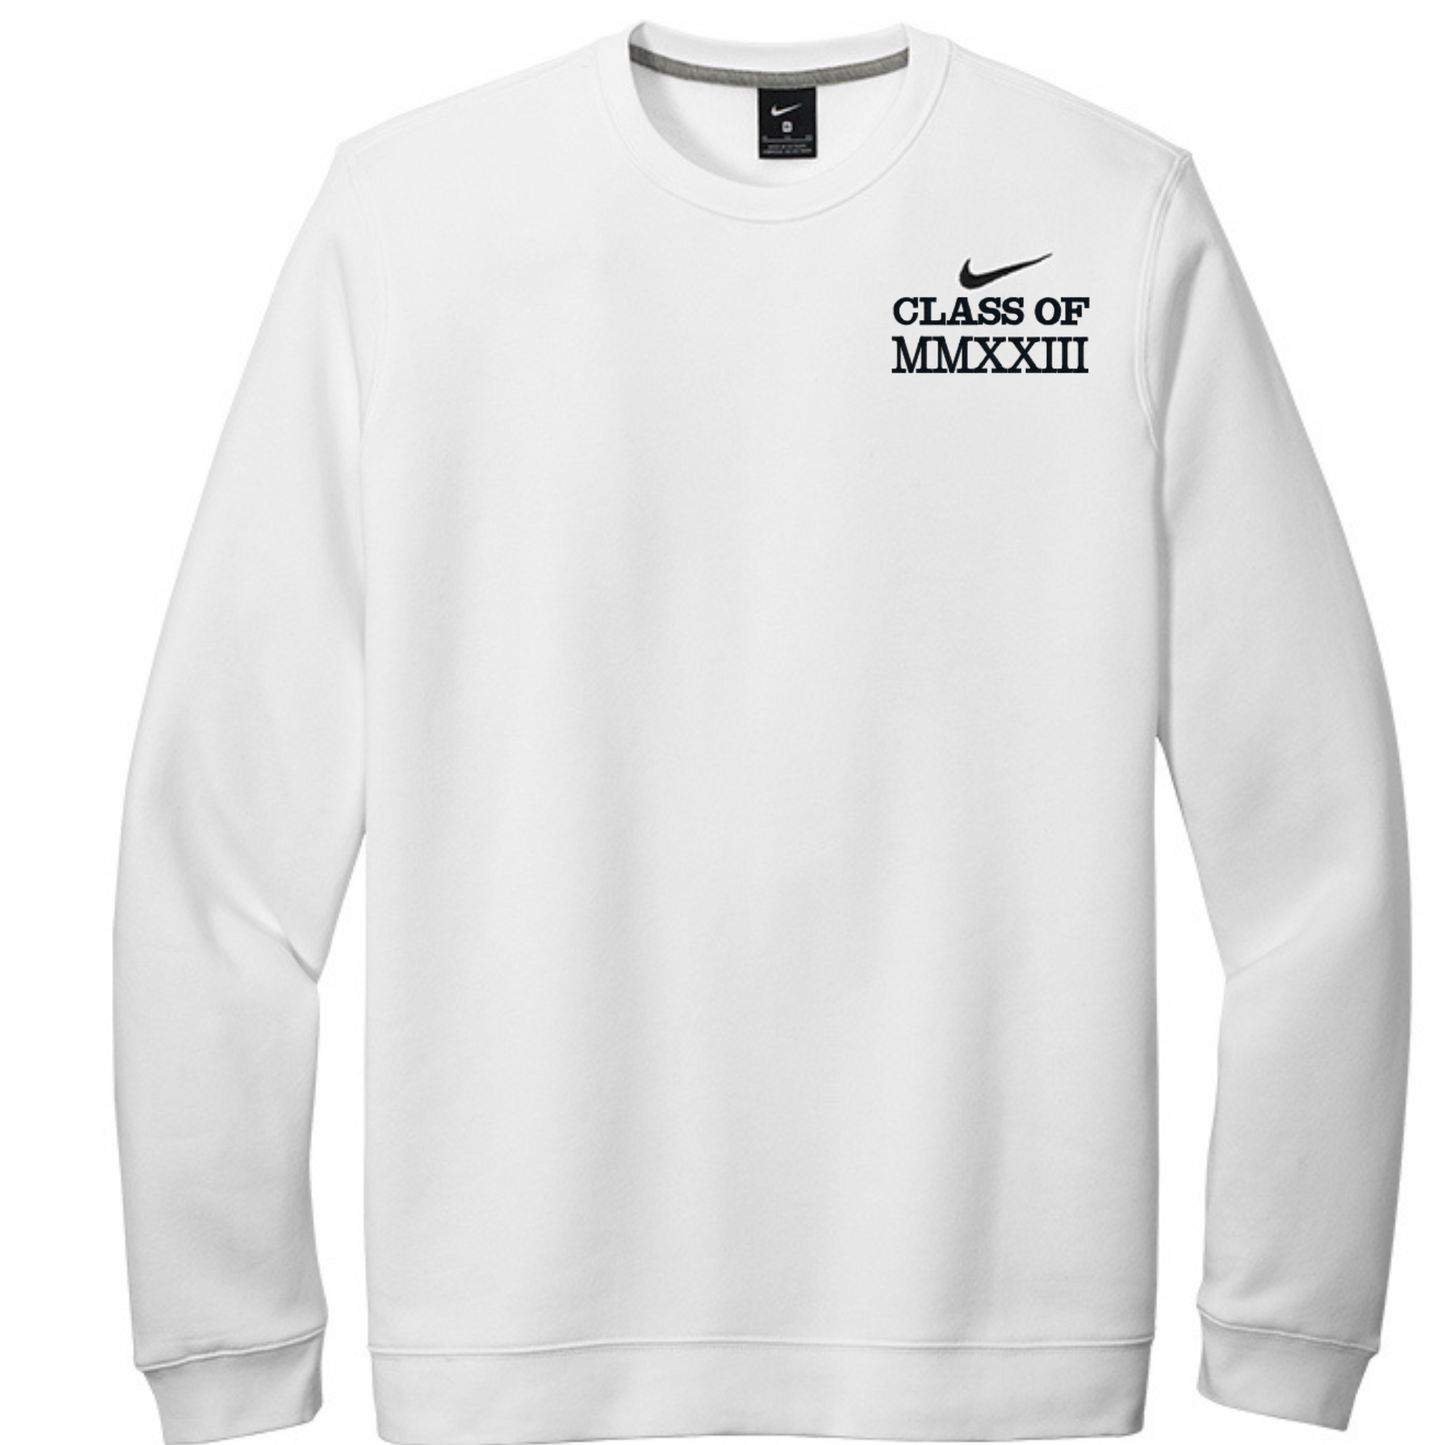 Nike Graduation gift Embroidered crewneck sweatshirt with "class of 2023" in Roman numerals,